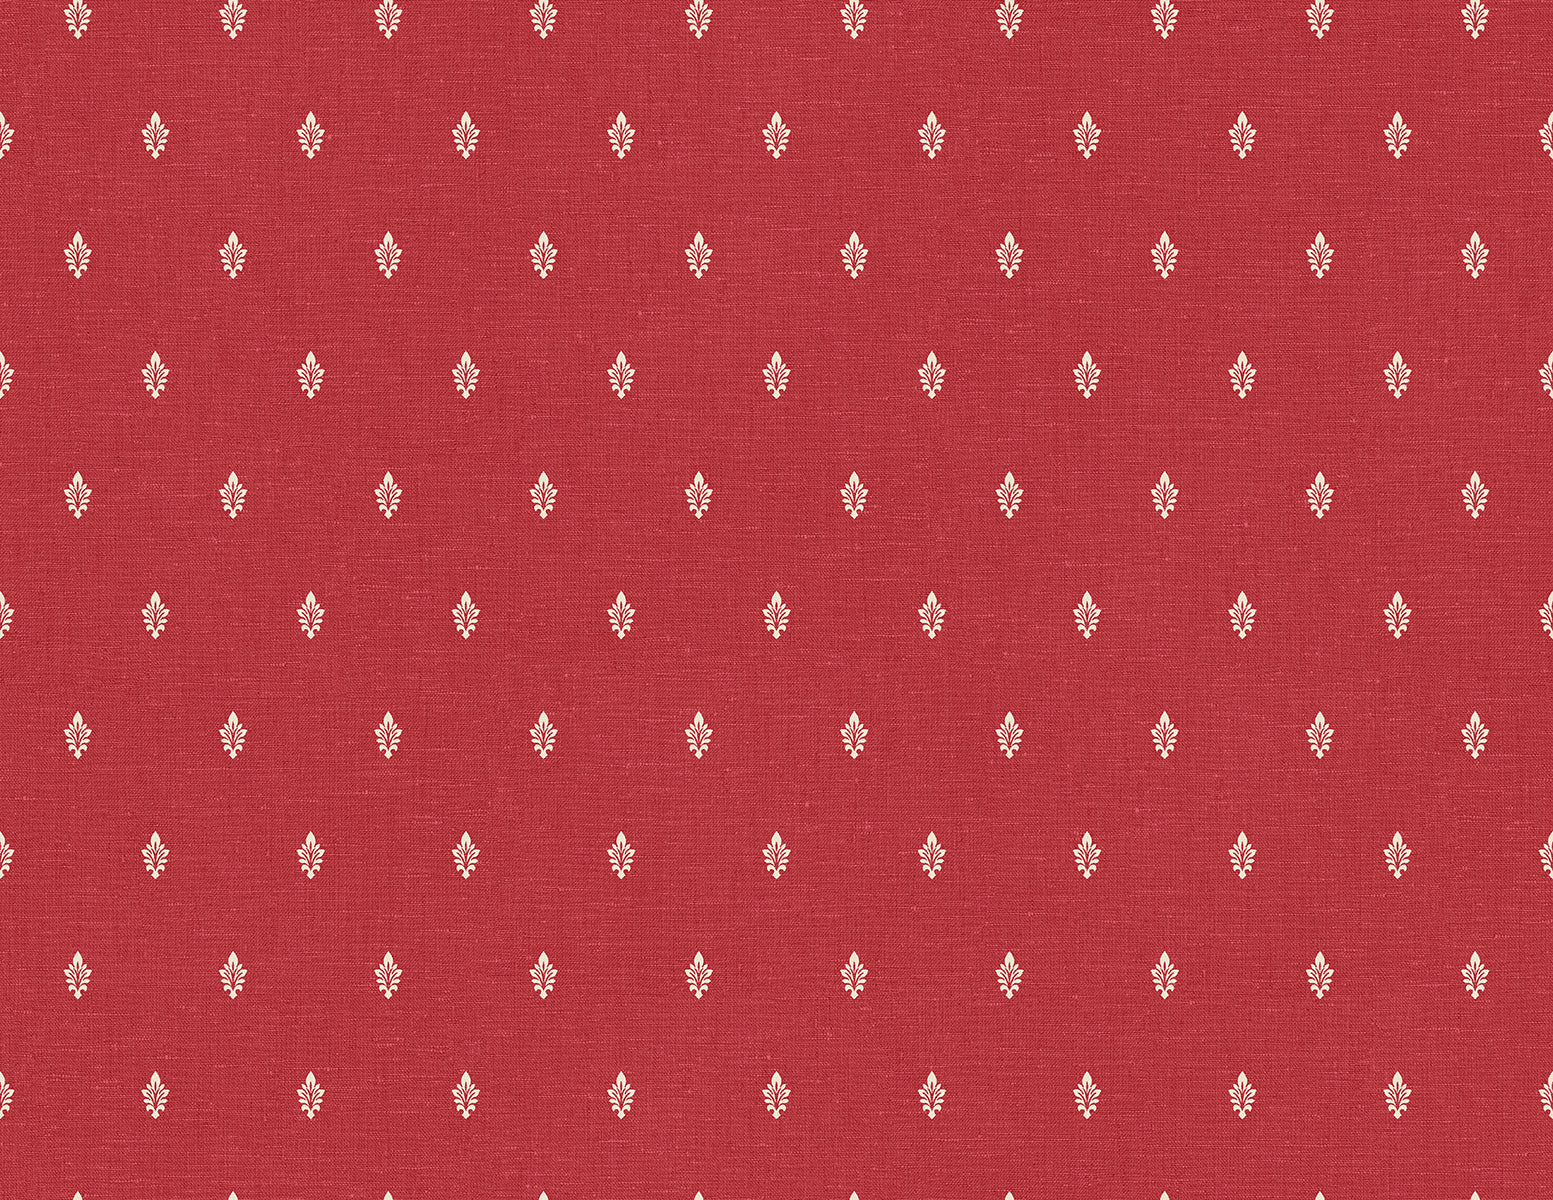 Seabrook Designs FC60601 French Country Petite Feuille Sprig  Wallpaper Antique Ruby